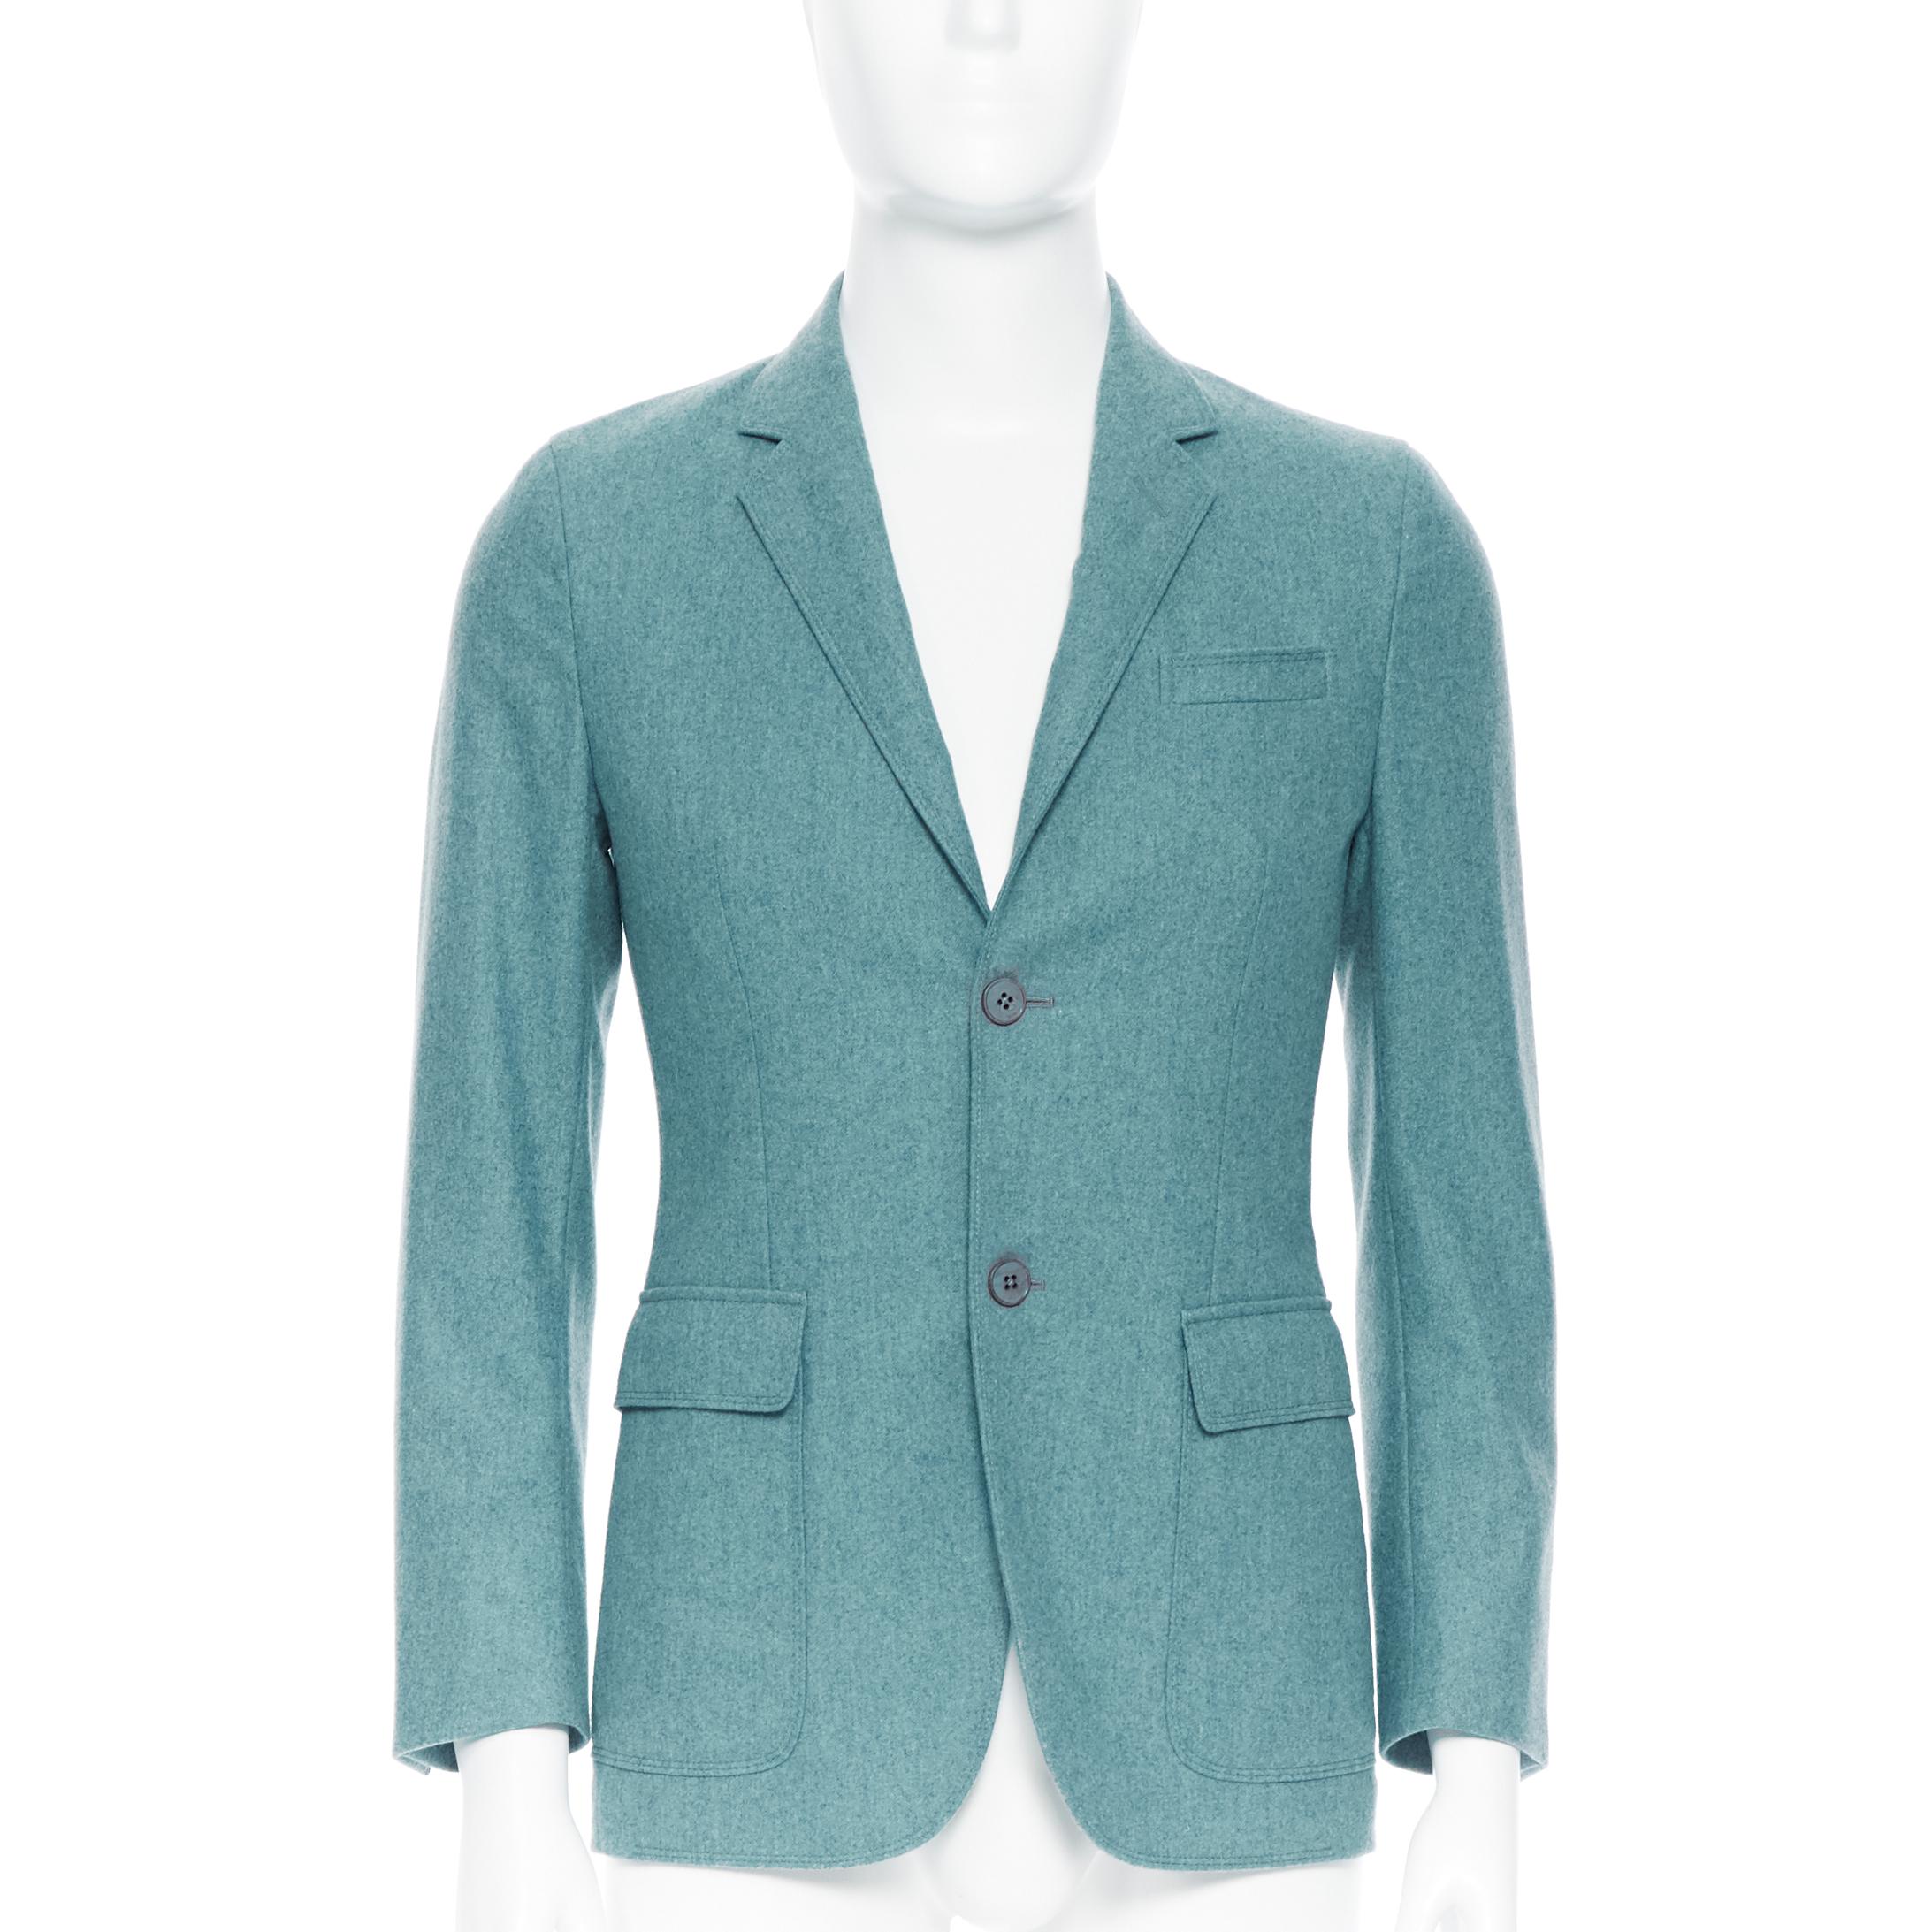 GUCCI men green blue patch pocket single-breast soft tailor blazer jacket EU44 Reference: CC/GEHI00303 
Brand: Gucci 
Material: Wool 
Color: Green 
Pattern: Solid 
Extra Detail: Blazer jacket. Notch lapels. 2 patch pockets and a slash pocket. 
Made